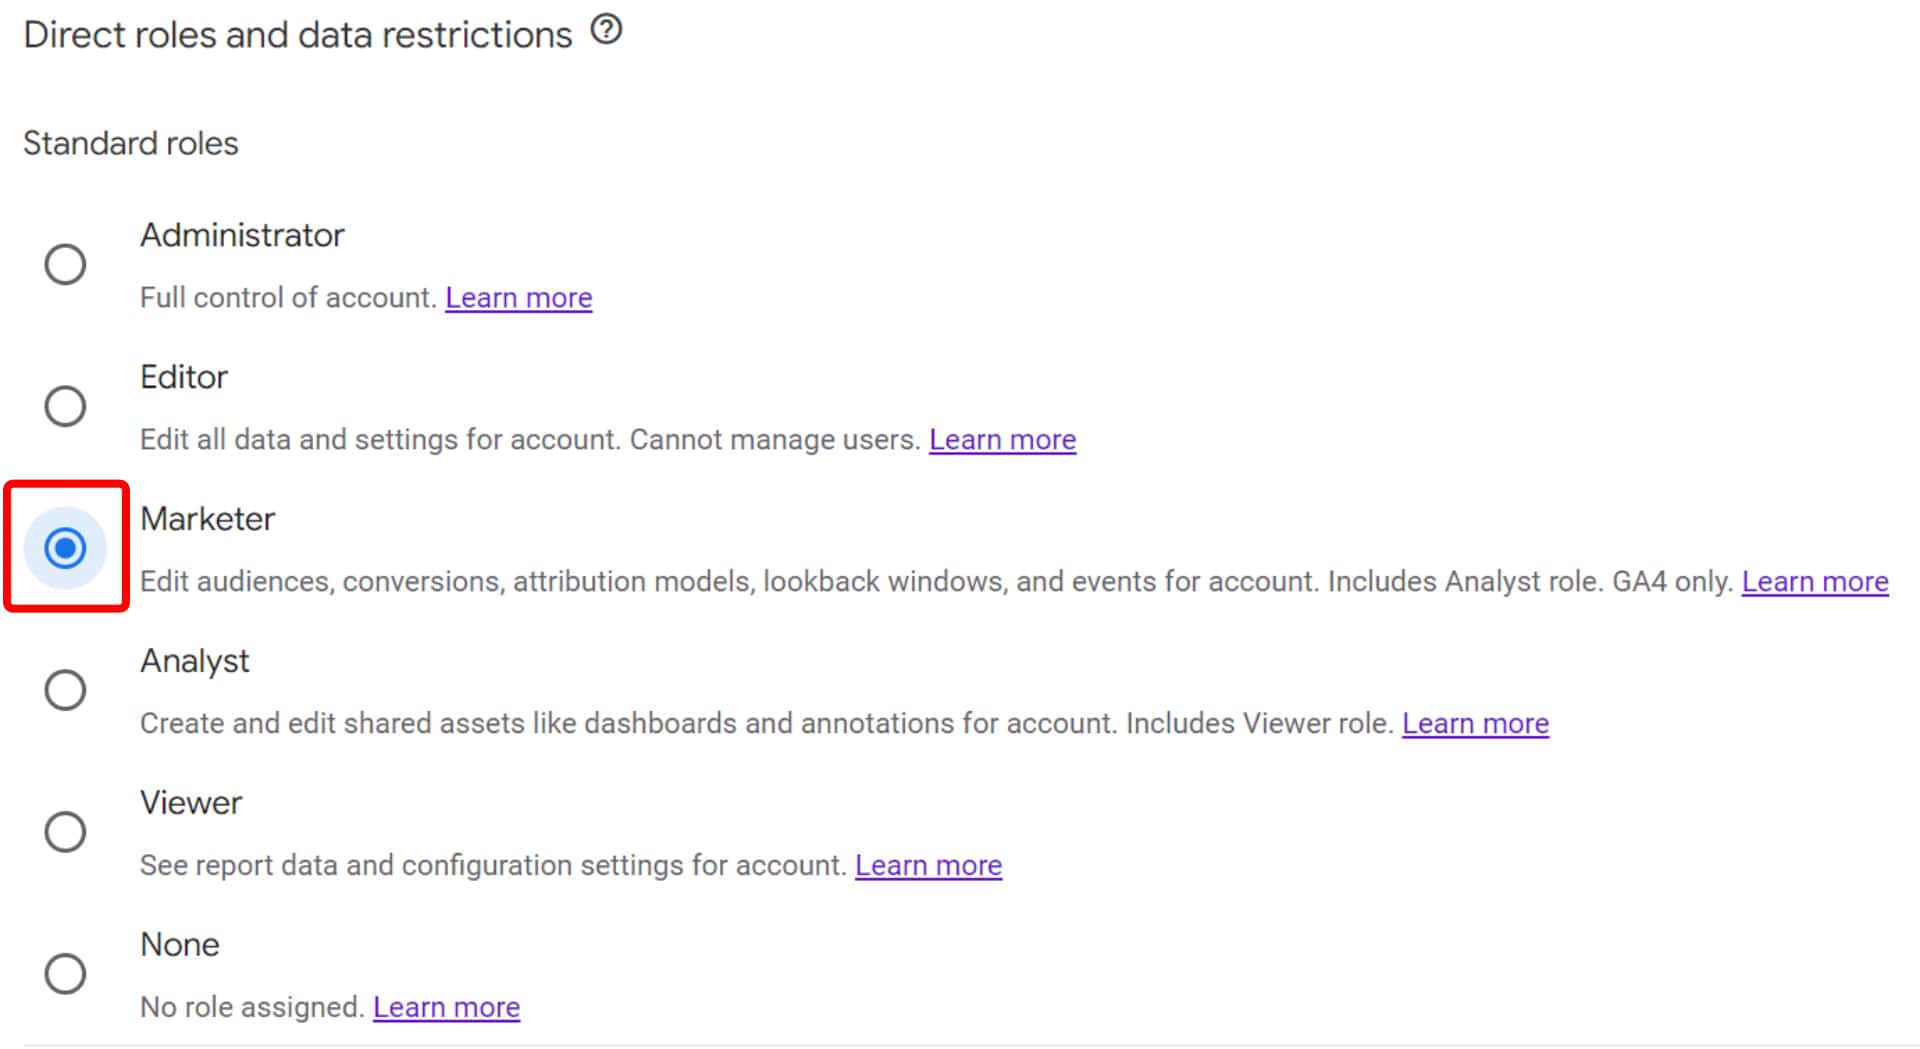 Screenshot of a webpage detailing different user roles and data restrictions with an emphasis on the "marketer" role.